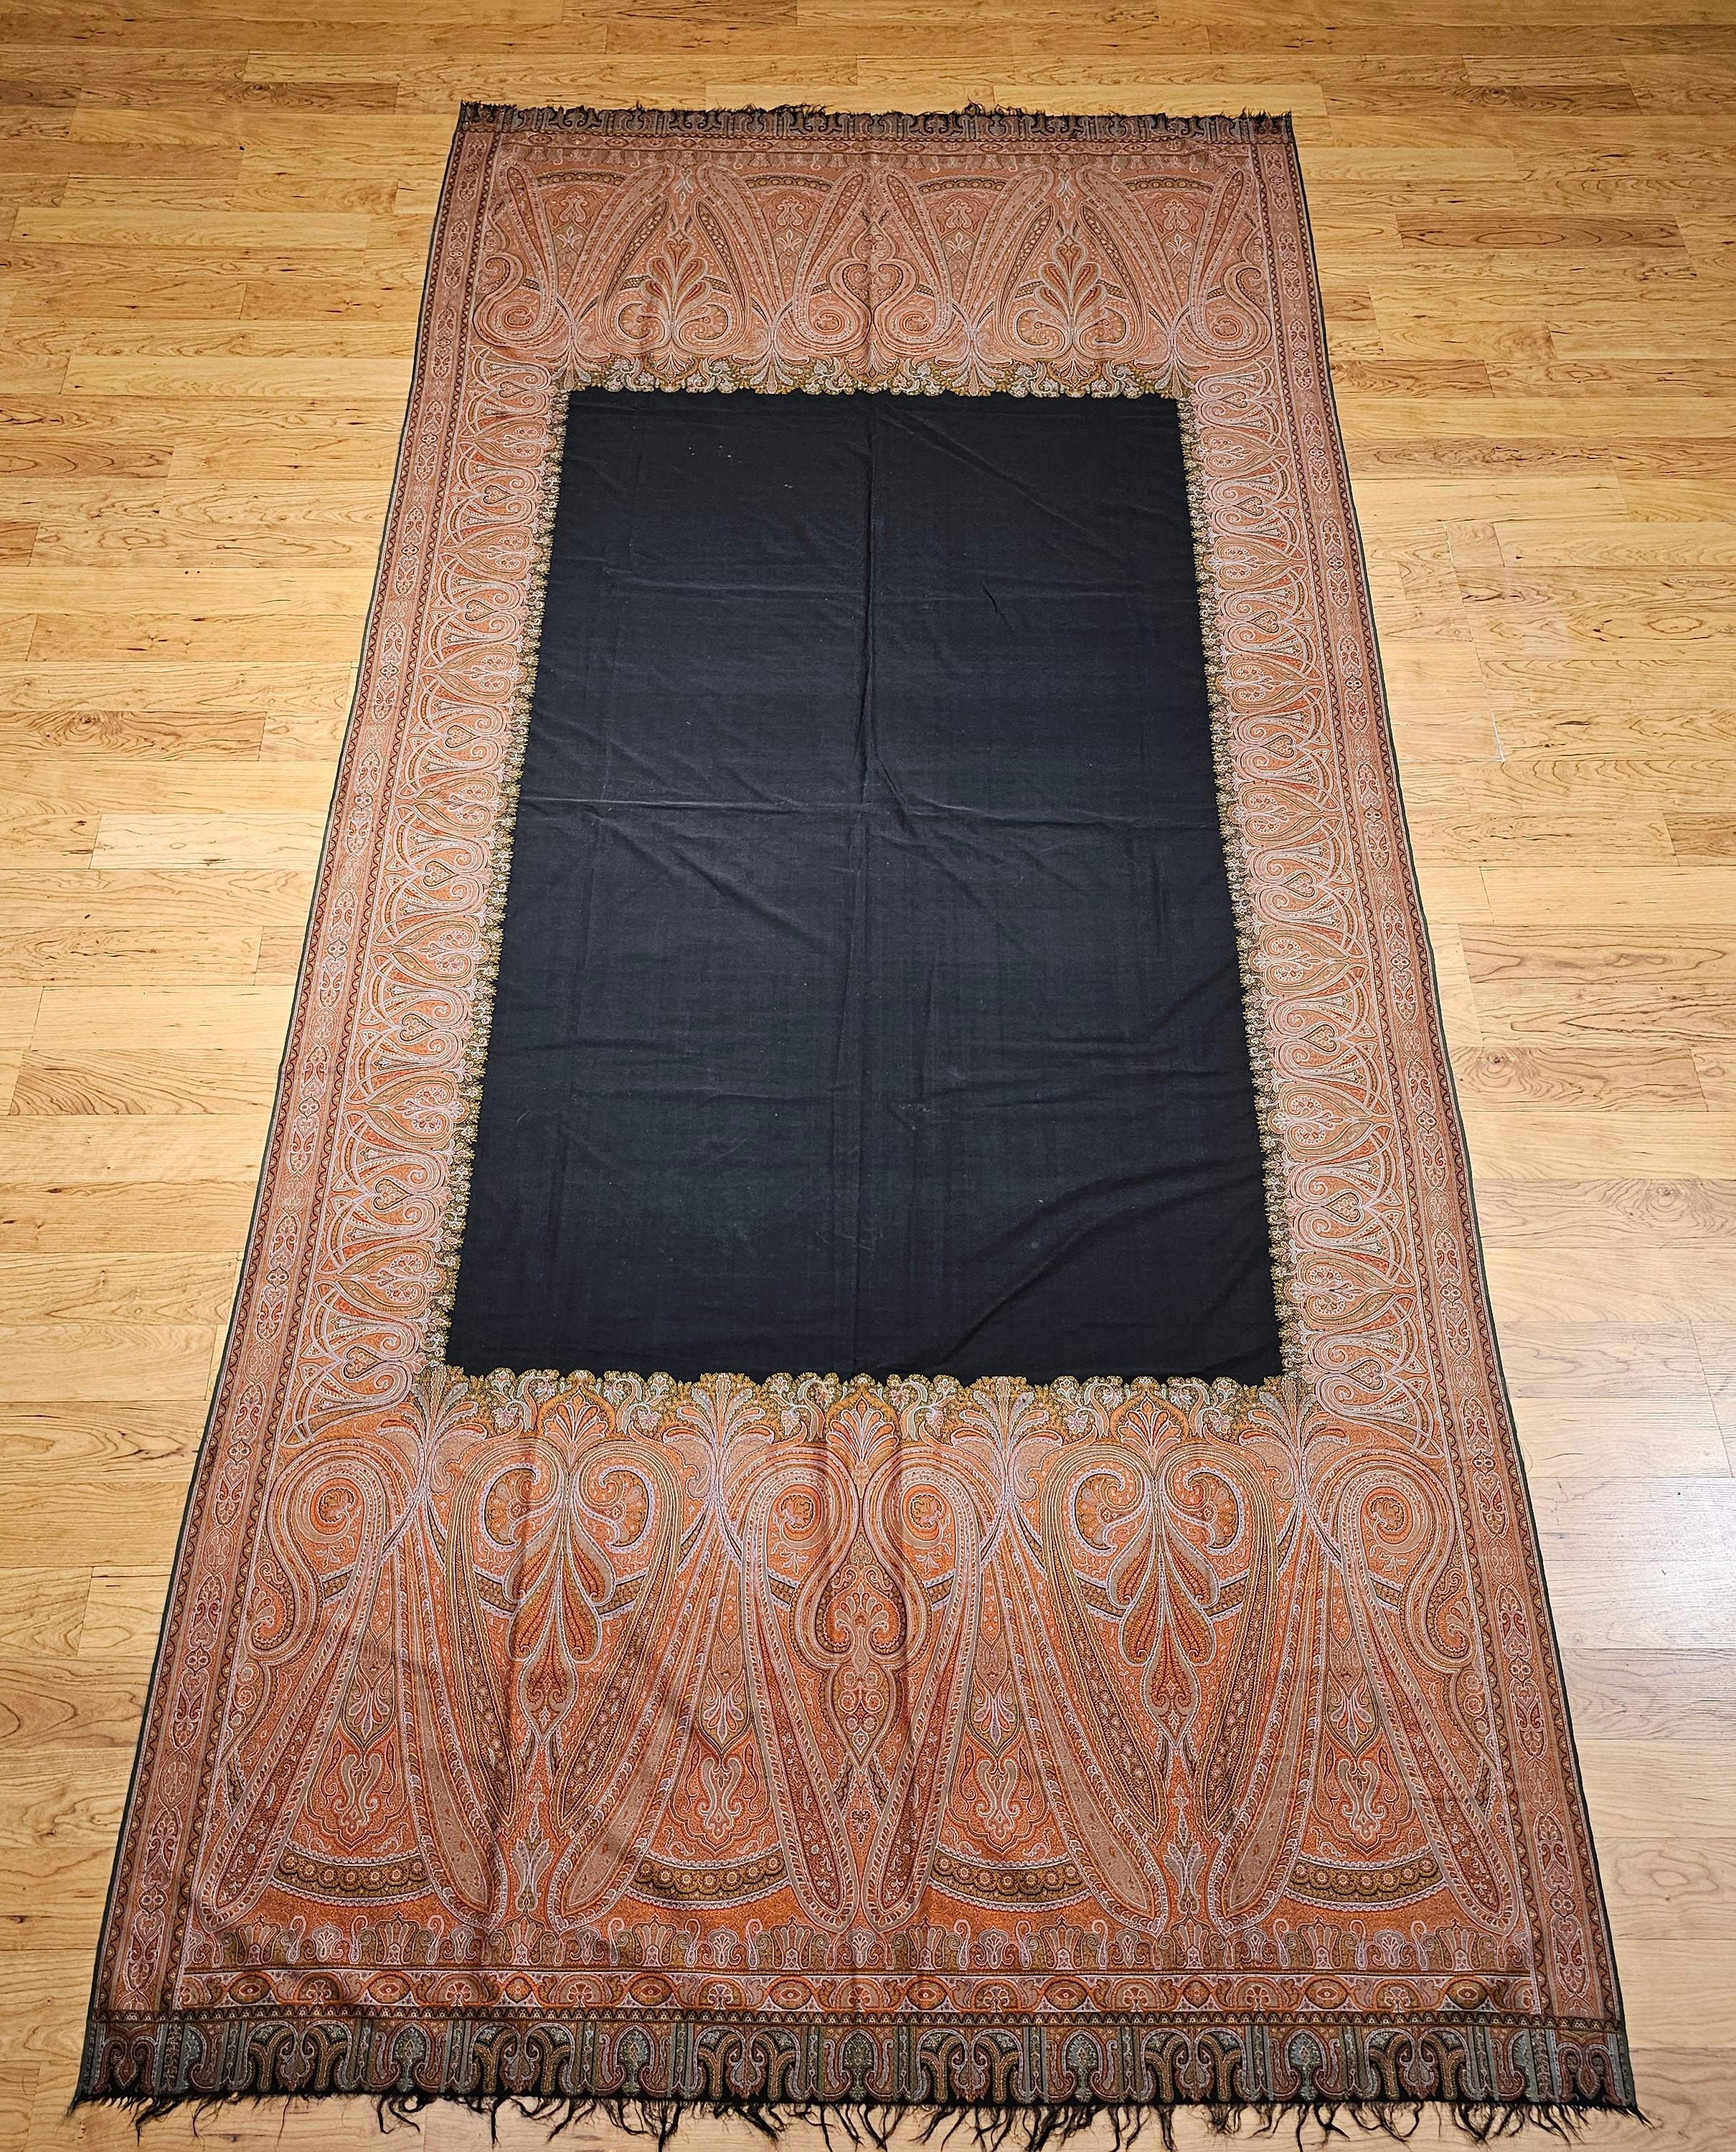 19th Century hand -woven Kashmiri Paisley Shawl from NW India in brick red, ivory, black and green.  The shawl has a paisley pattern as the border with larger paisley form on each end with a center part of the shawl woven in a blank black material. 